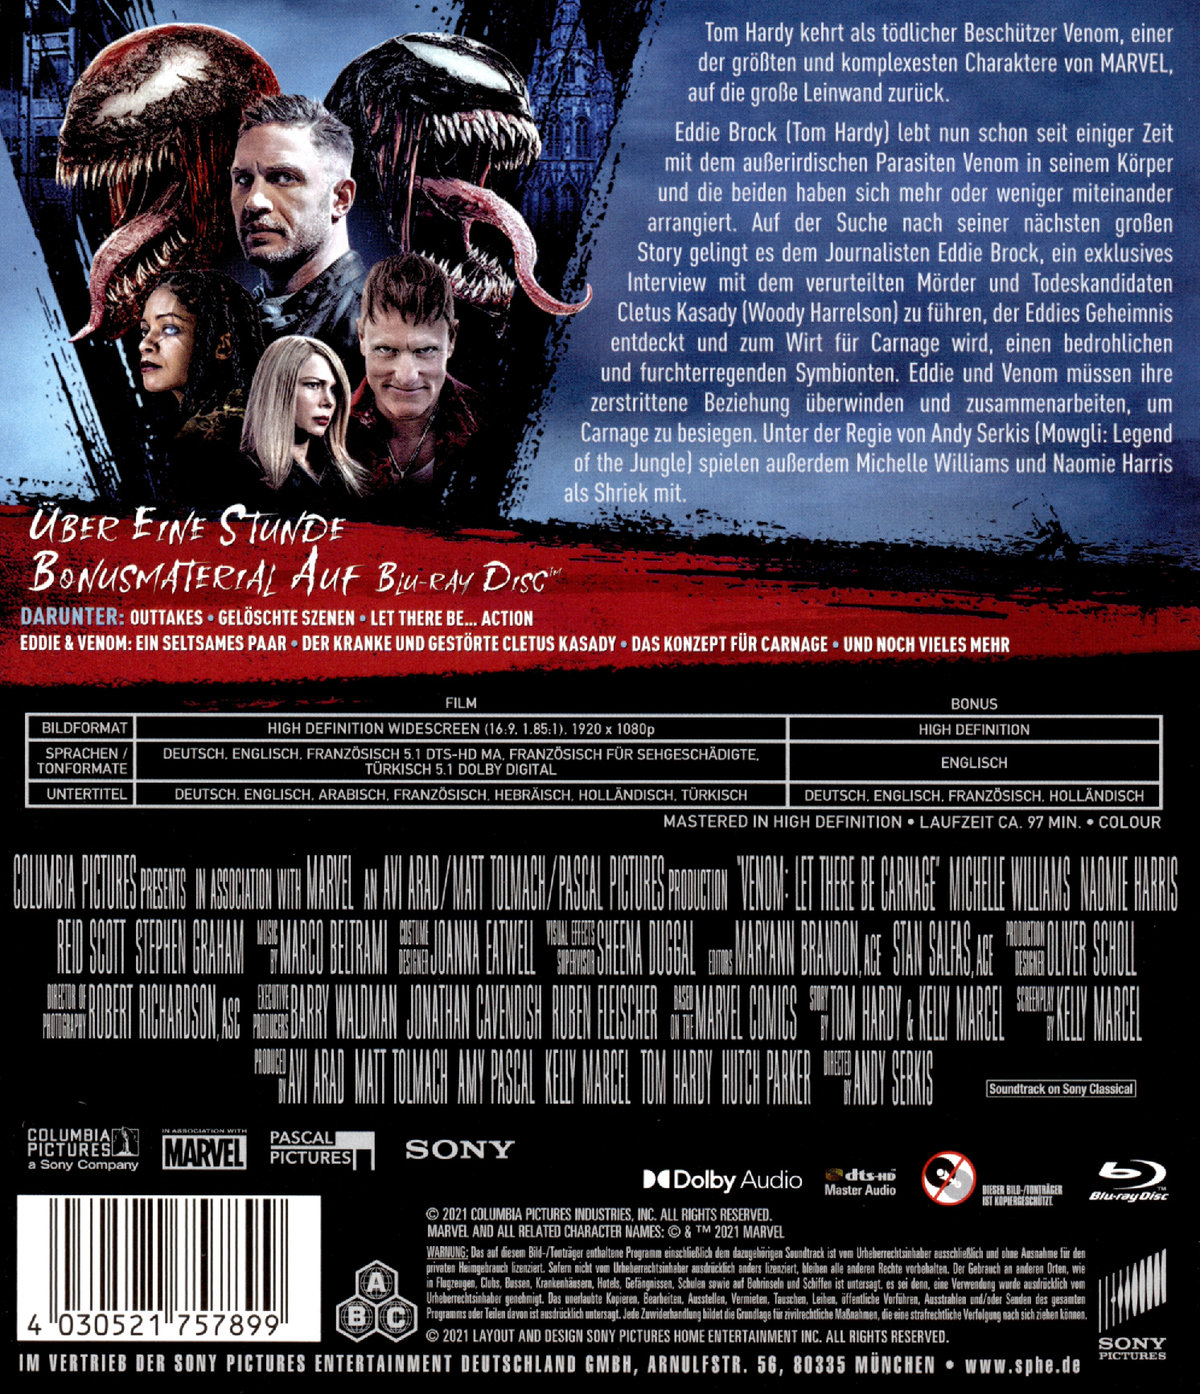 Venom: Let There Be Carnage (blu-ray)